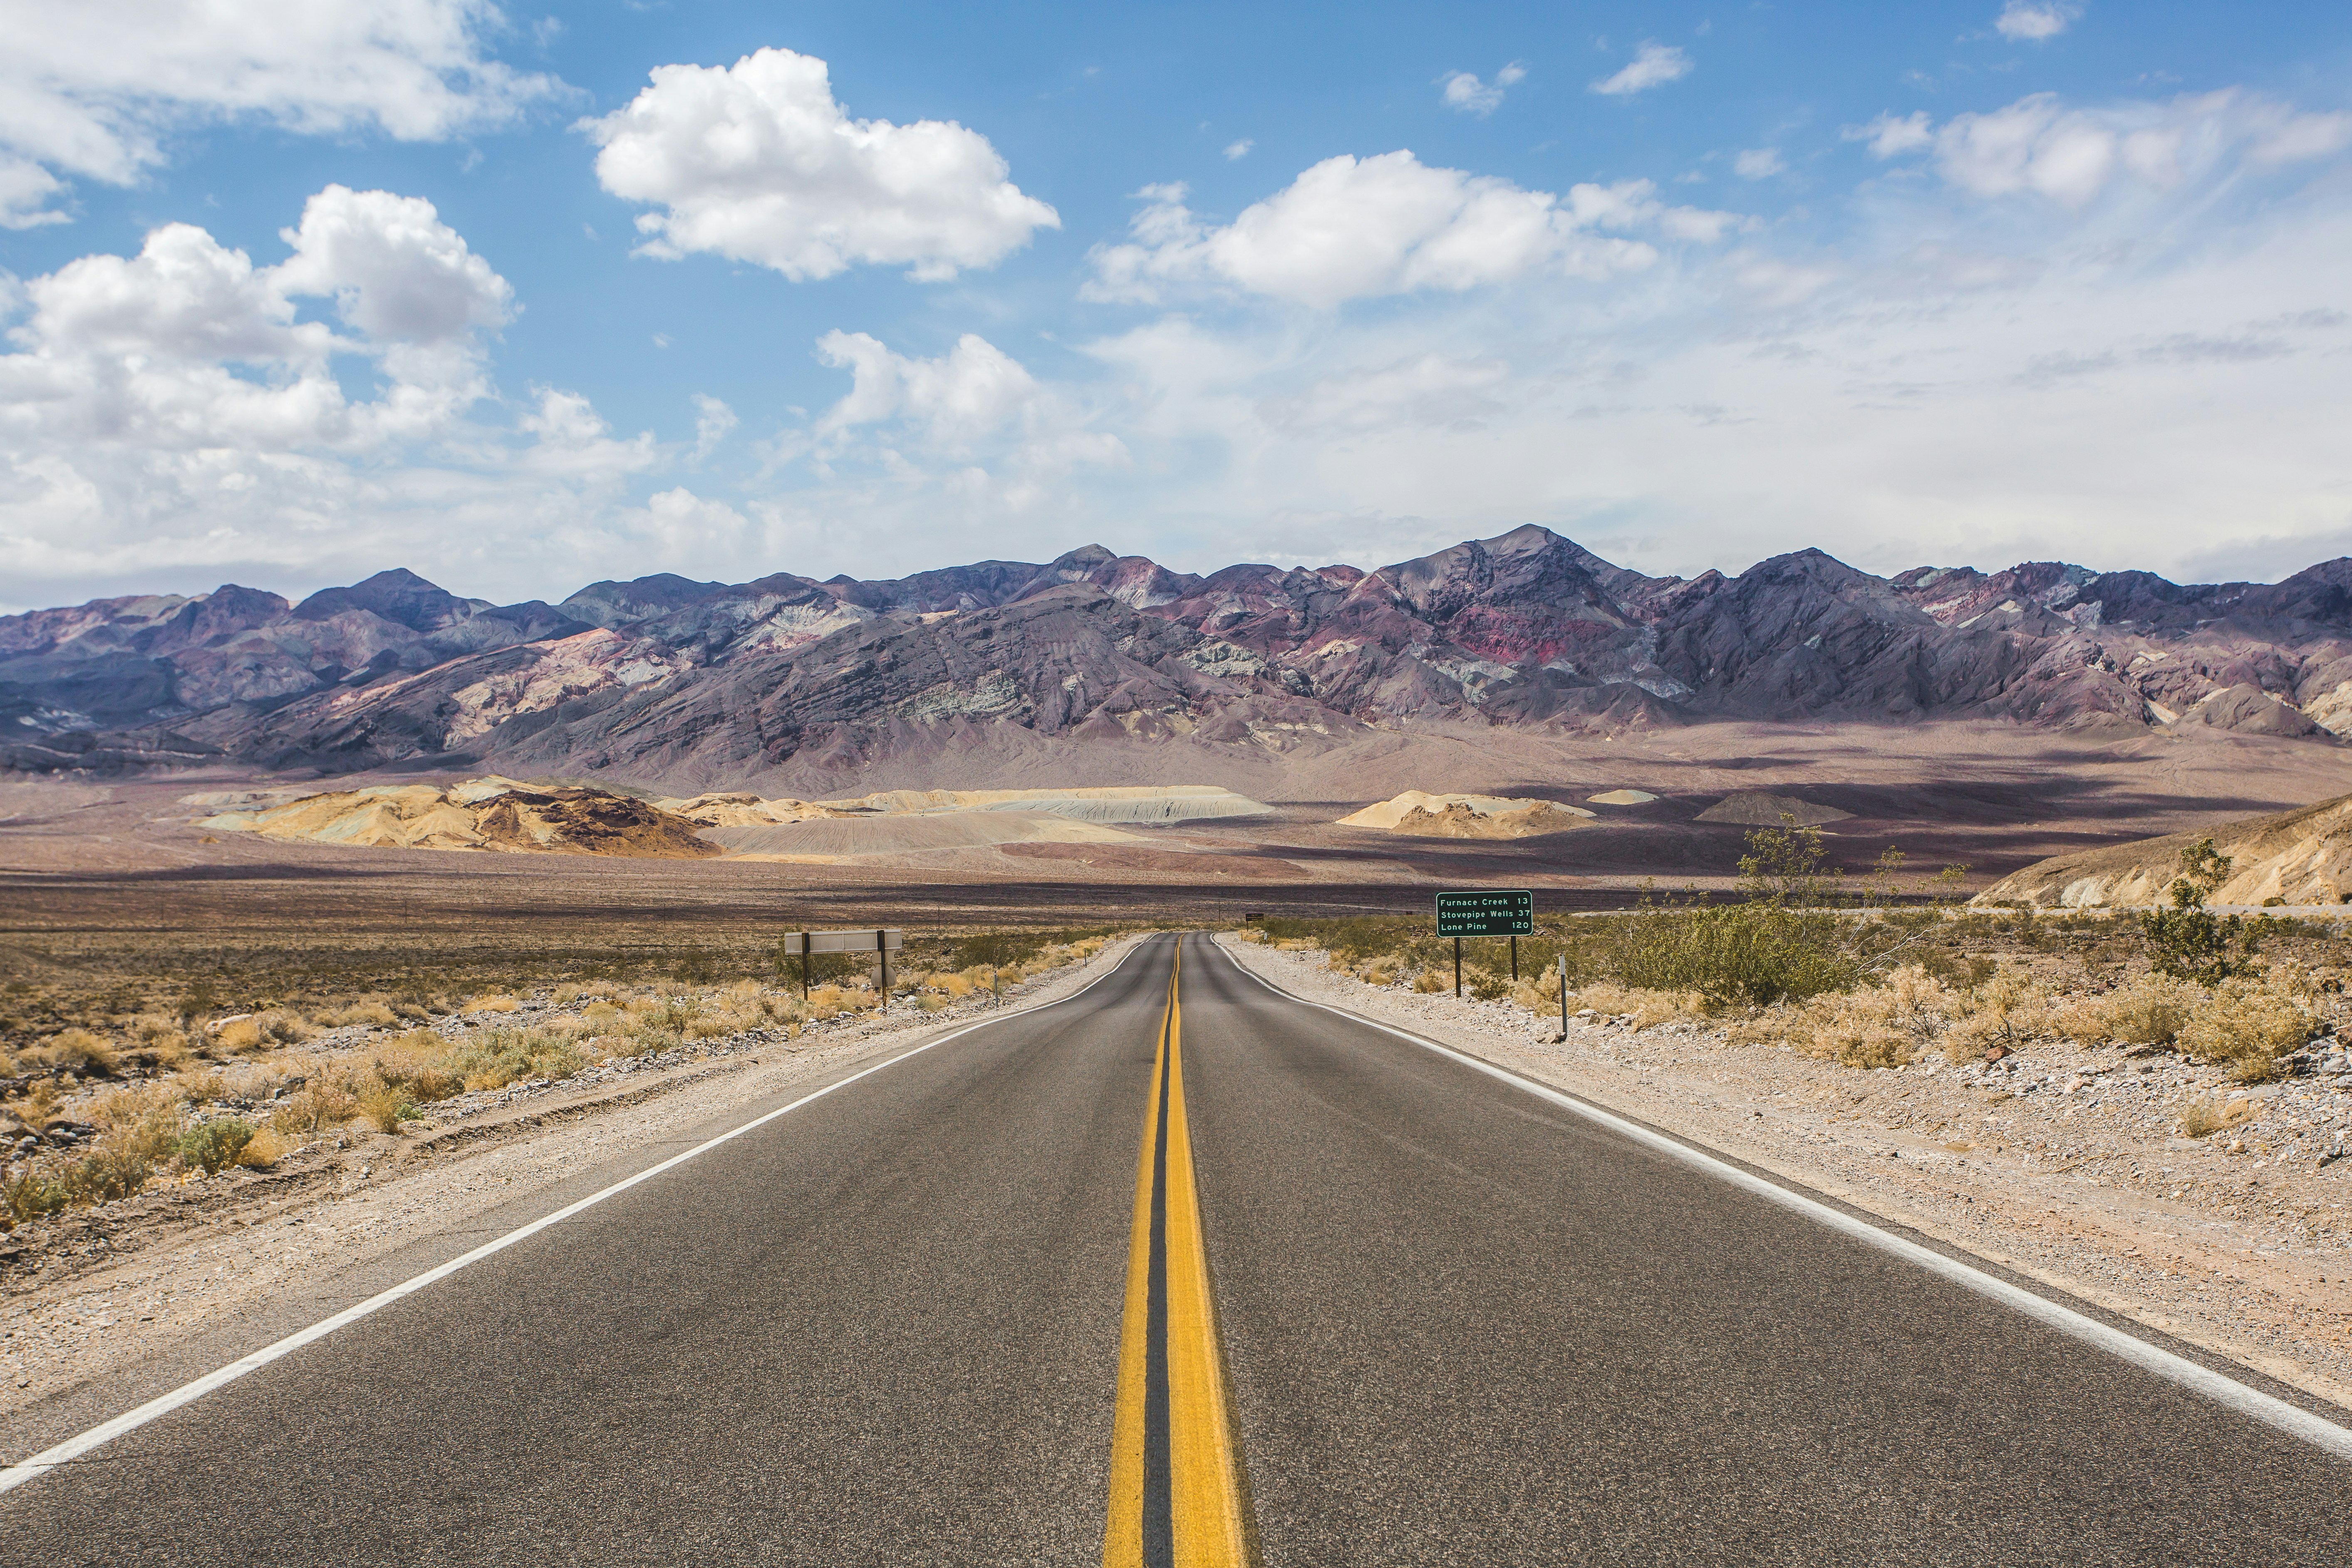 Scenic view of Death Valley National Park's iconic highway stretching into the horizon, surrounded by vast desert landscapes, ideal for exploring in a rented RV